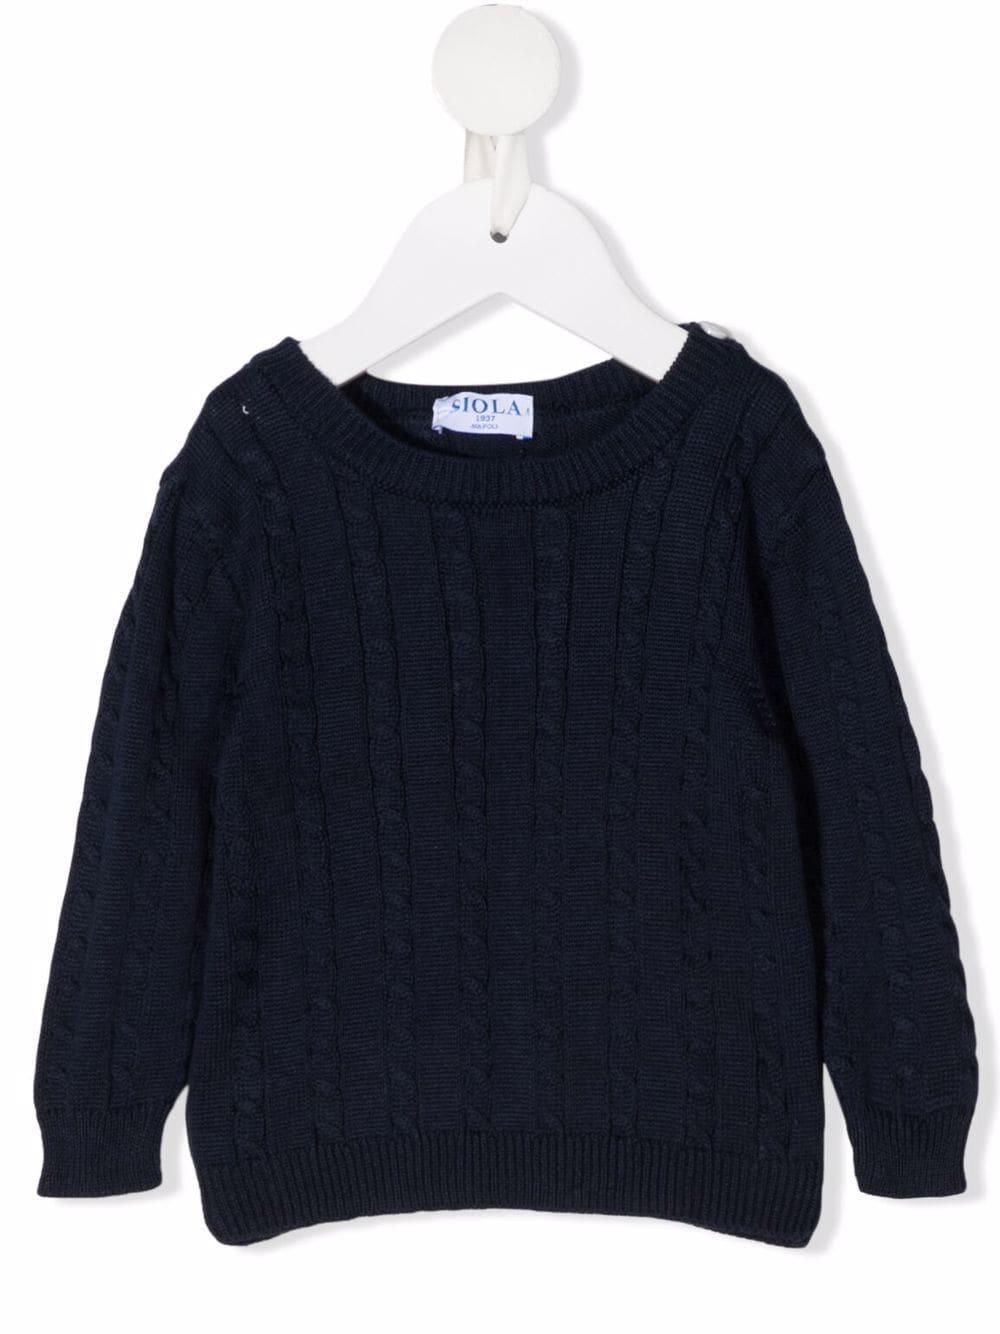 Image 1 of Siola cable-knit cotton jumper